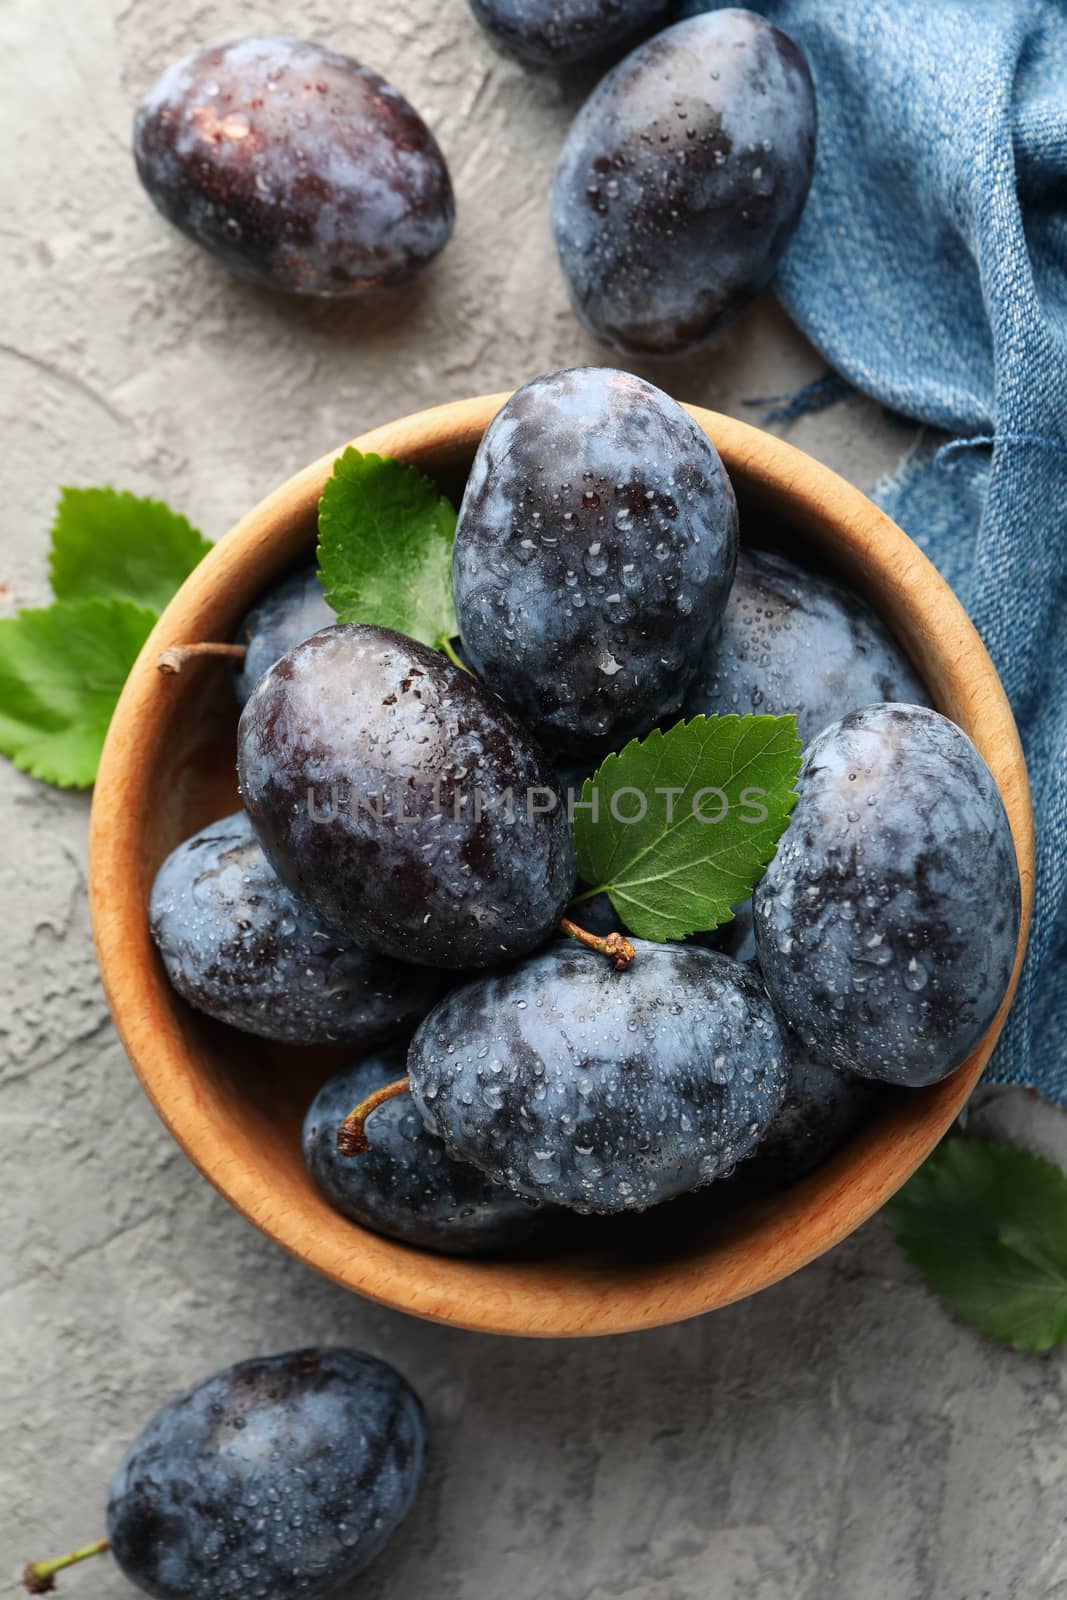 Napkin and bowl with plums on gray background by AtlasCompany